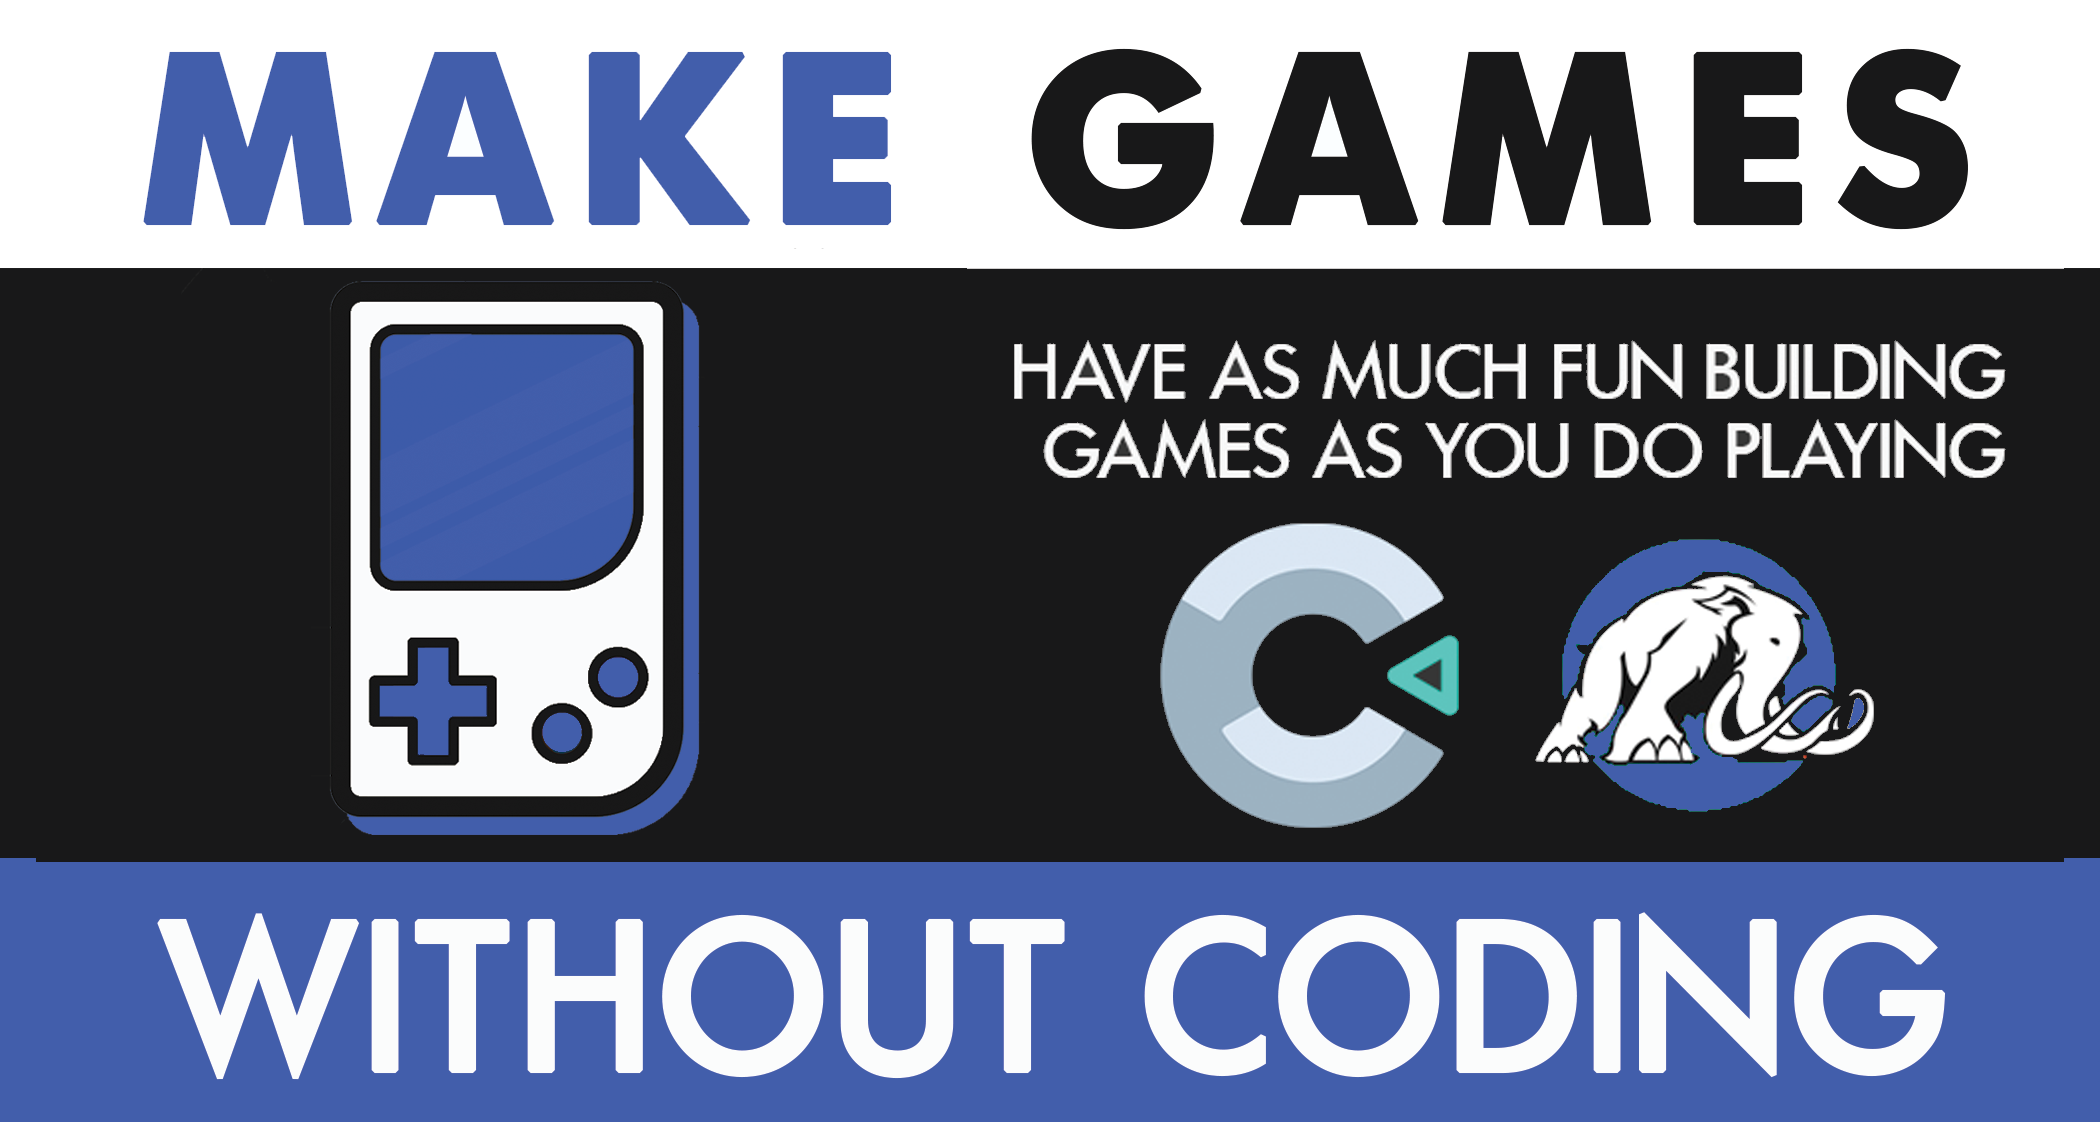 MAKE GAMES WITHOUT CODING